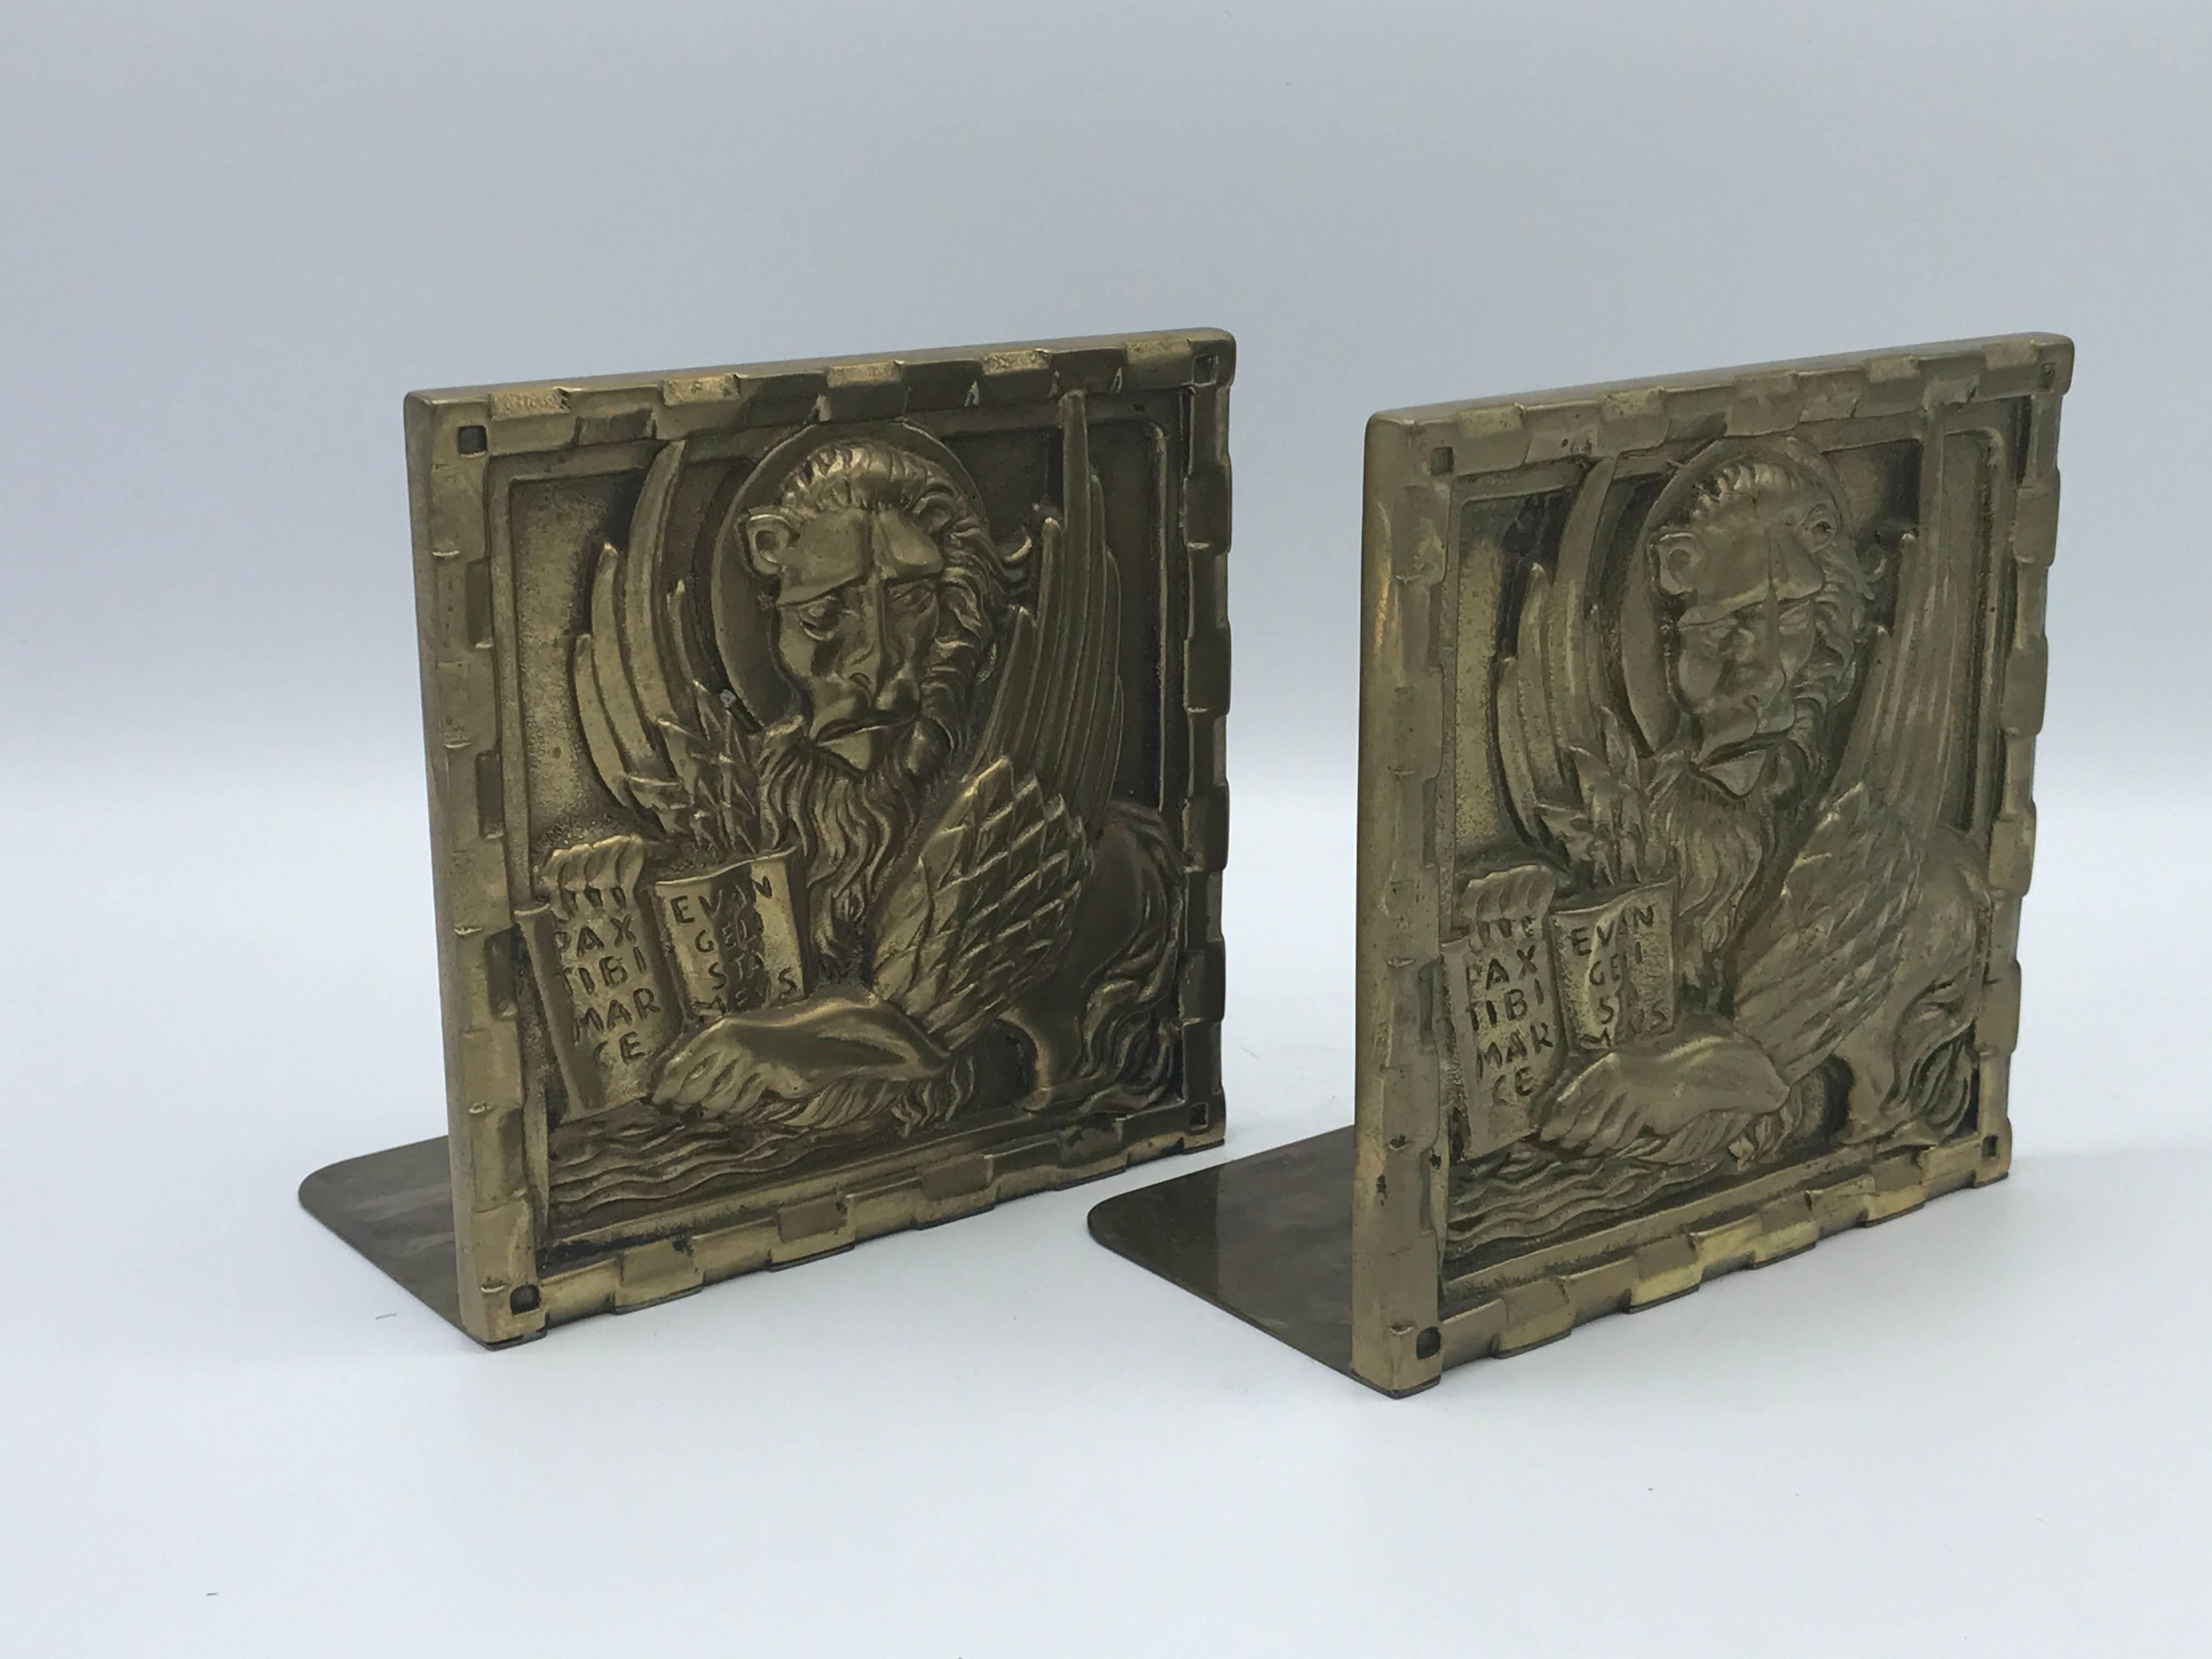 Offered is a fabulous pair of 1960s brass 'Seal of Venice' lion bookends. Marked: Bronzi Artistici, Venezia.